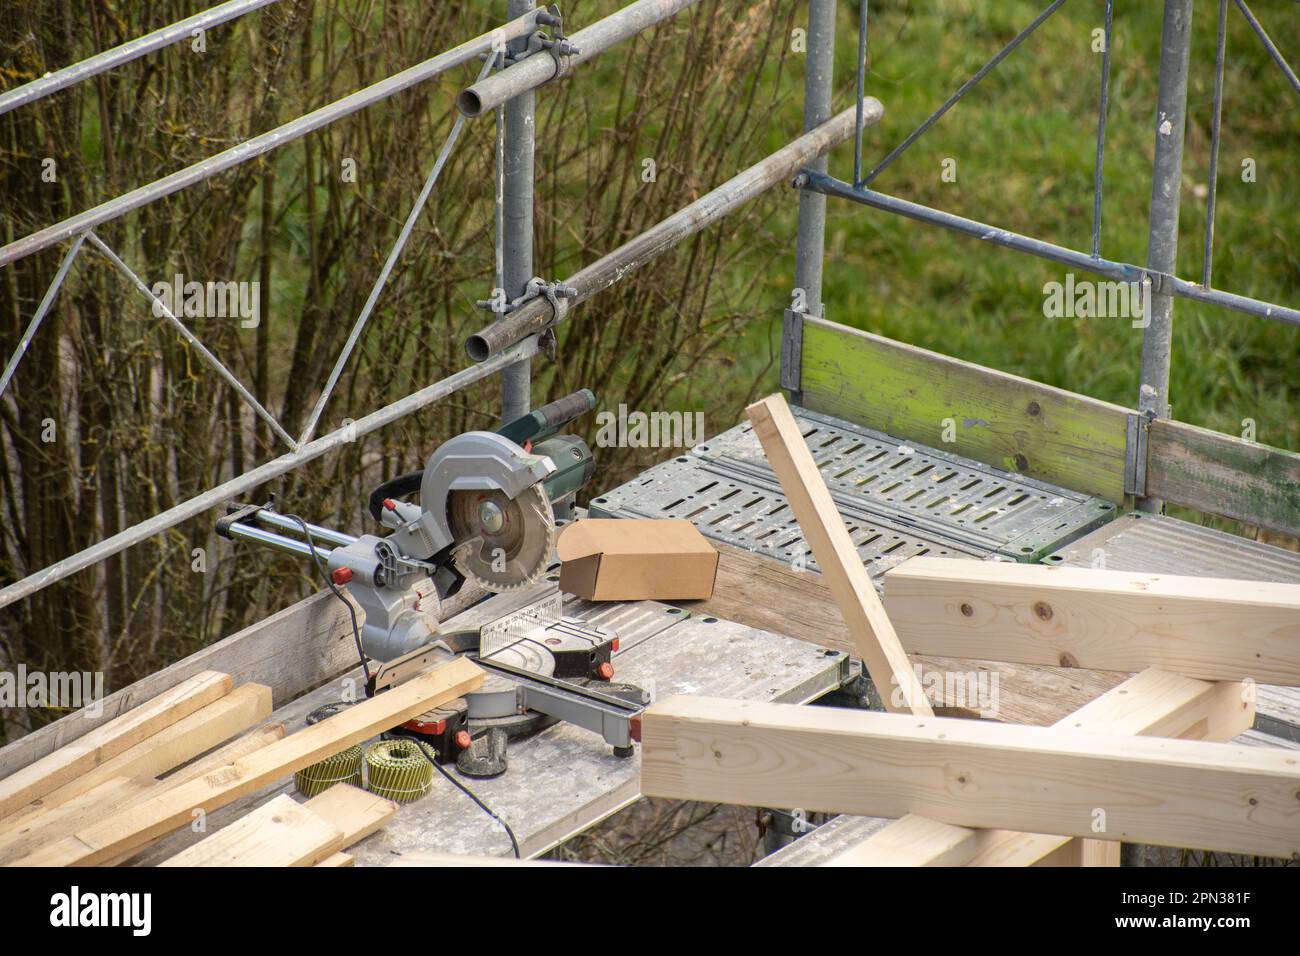 Multi material saw from carpenter on construction railing of a new wooden roof with rafter Stock Photo